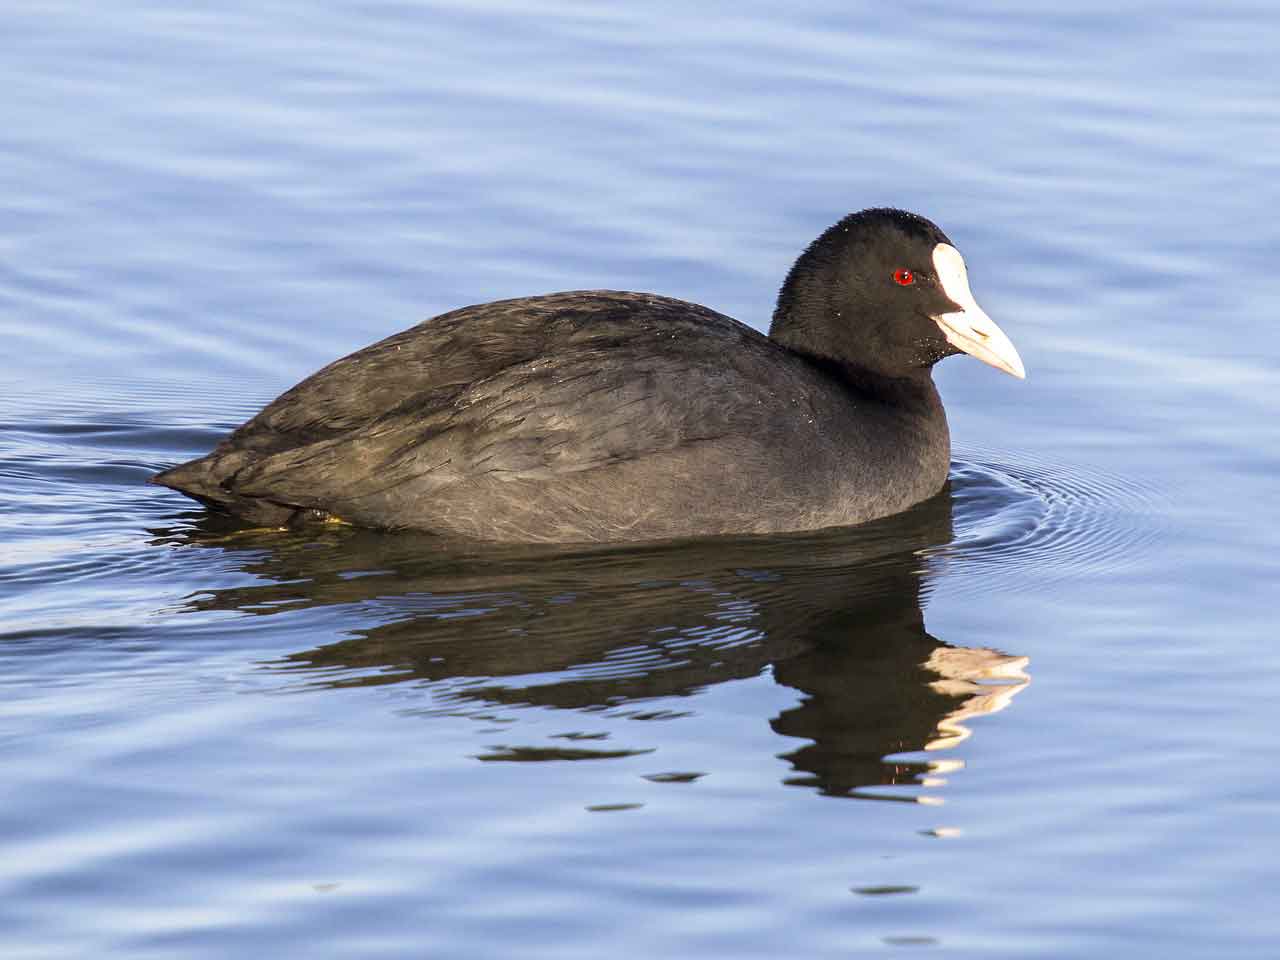 An American Coot swimming in a lake.